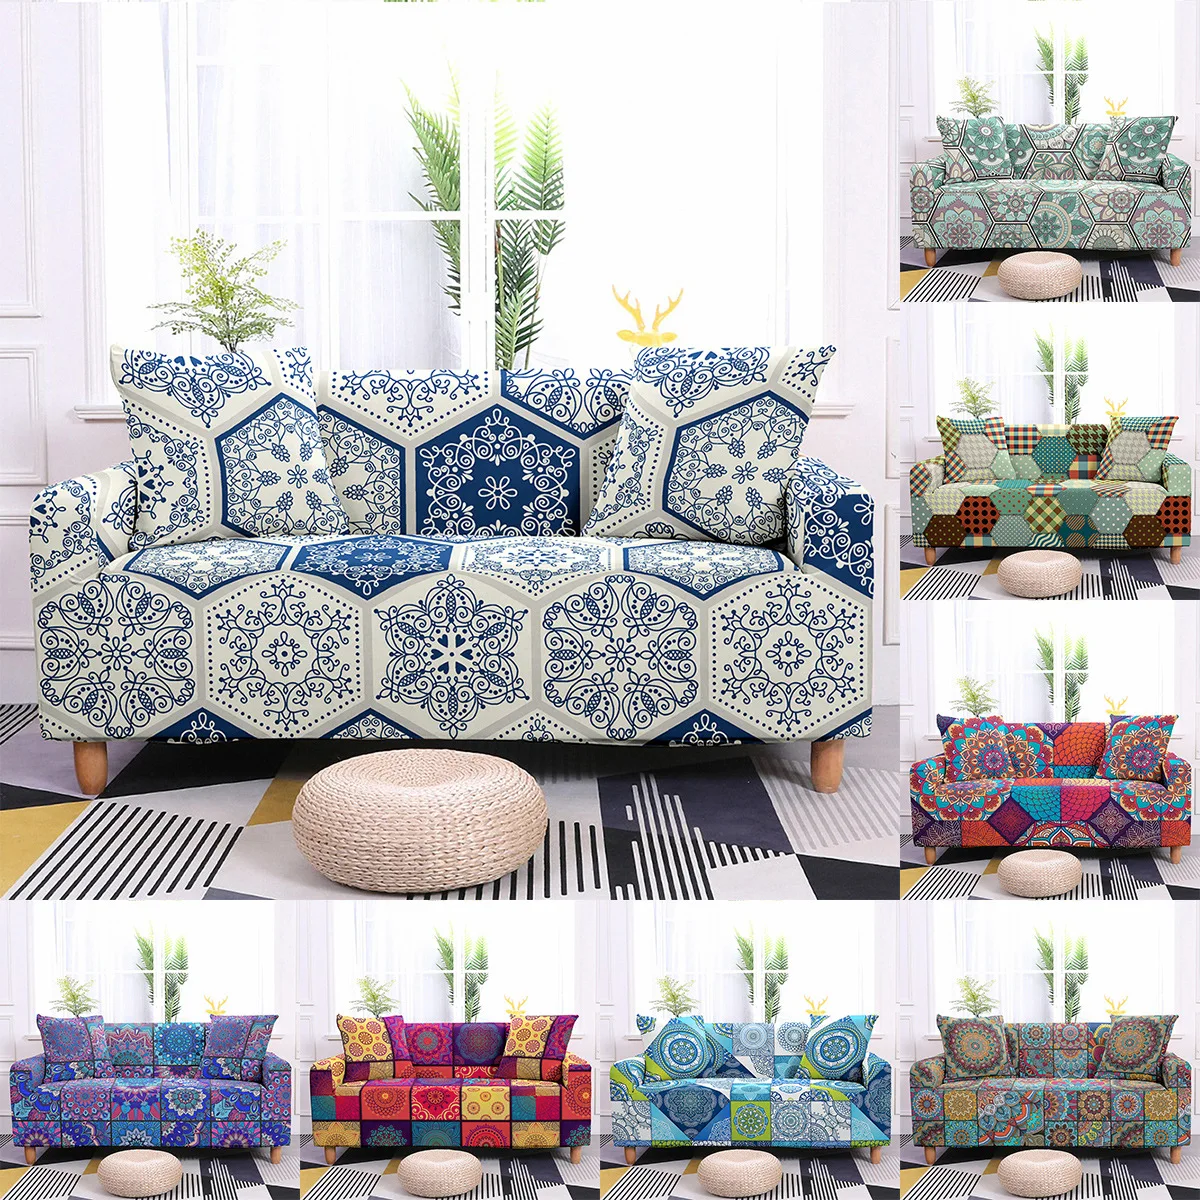 

Geomety Sofa Cover for Living Room 3D Mandala Stretch Slipcovers Sectional Couch Cover 1/2/3/4 Seater Funda De Sofá L Shape Sofa